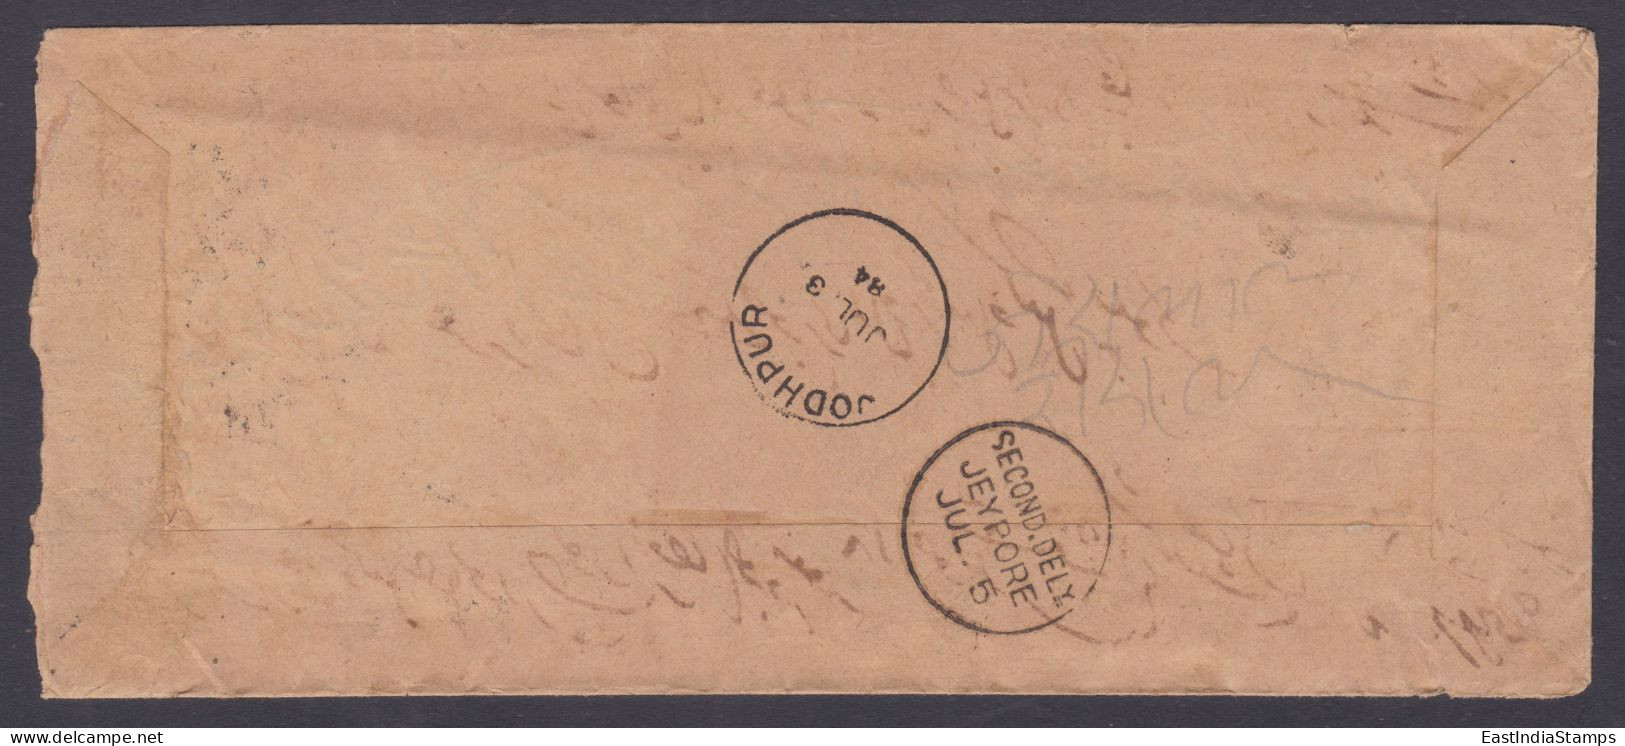 Inde British East India Company Queen Victoria Used 1884 Cover Half Anna Stamp, Jeypore, Jaipur, Jodhpur Re-directed - 1858-79 Crown Colony